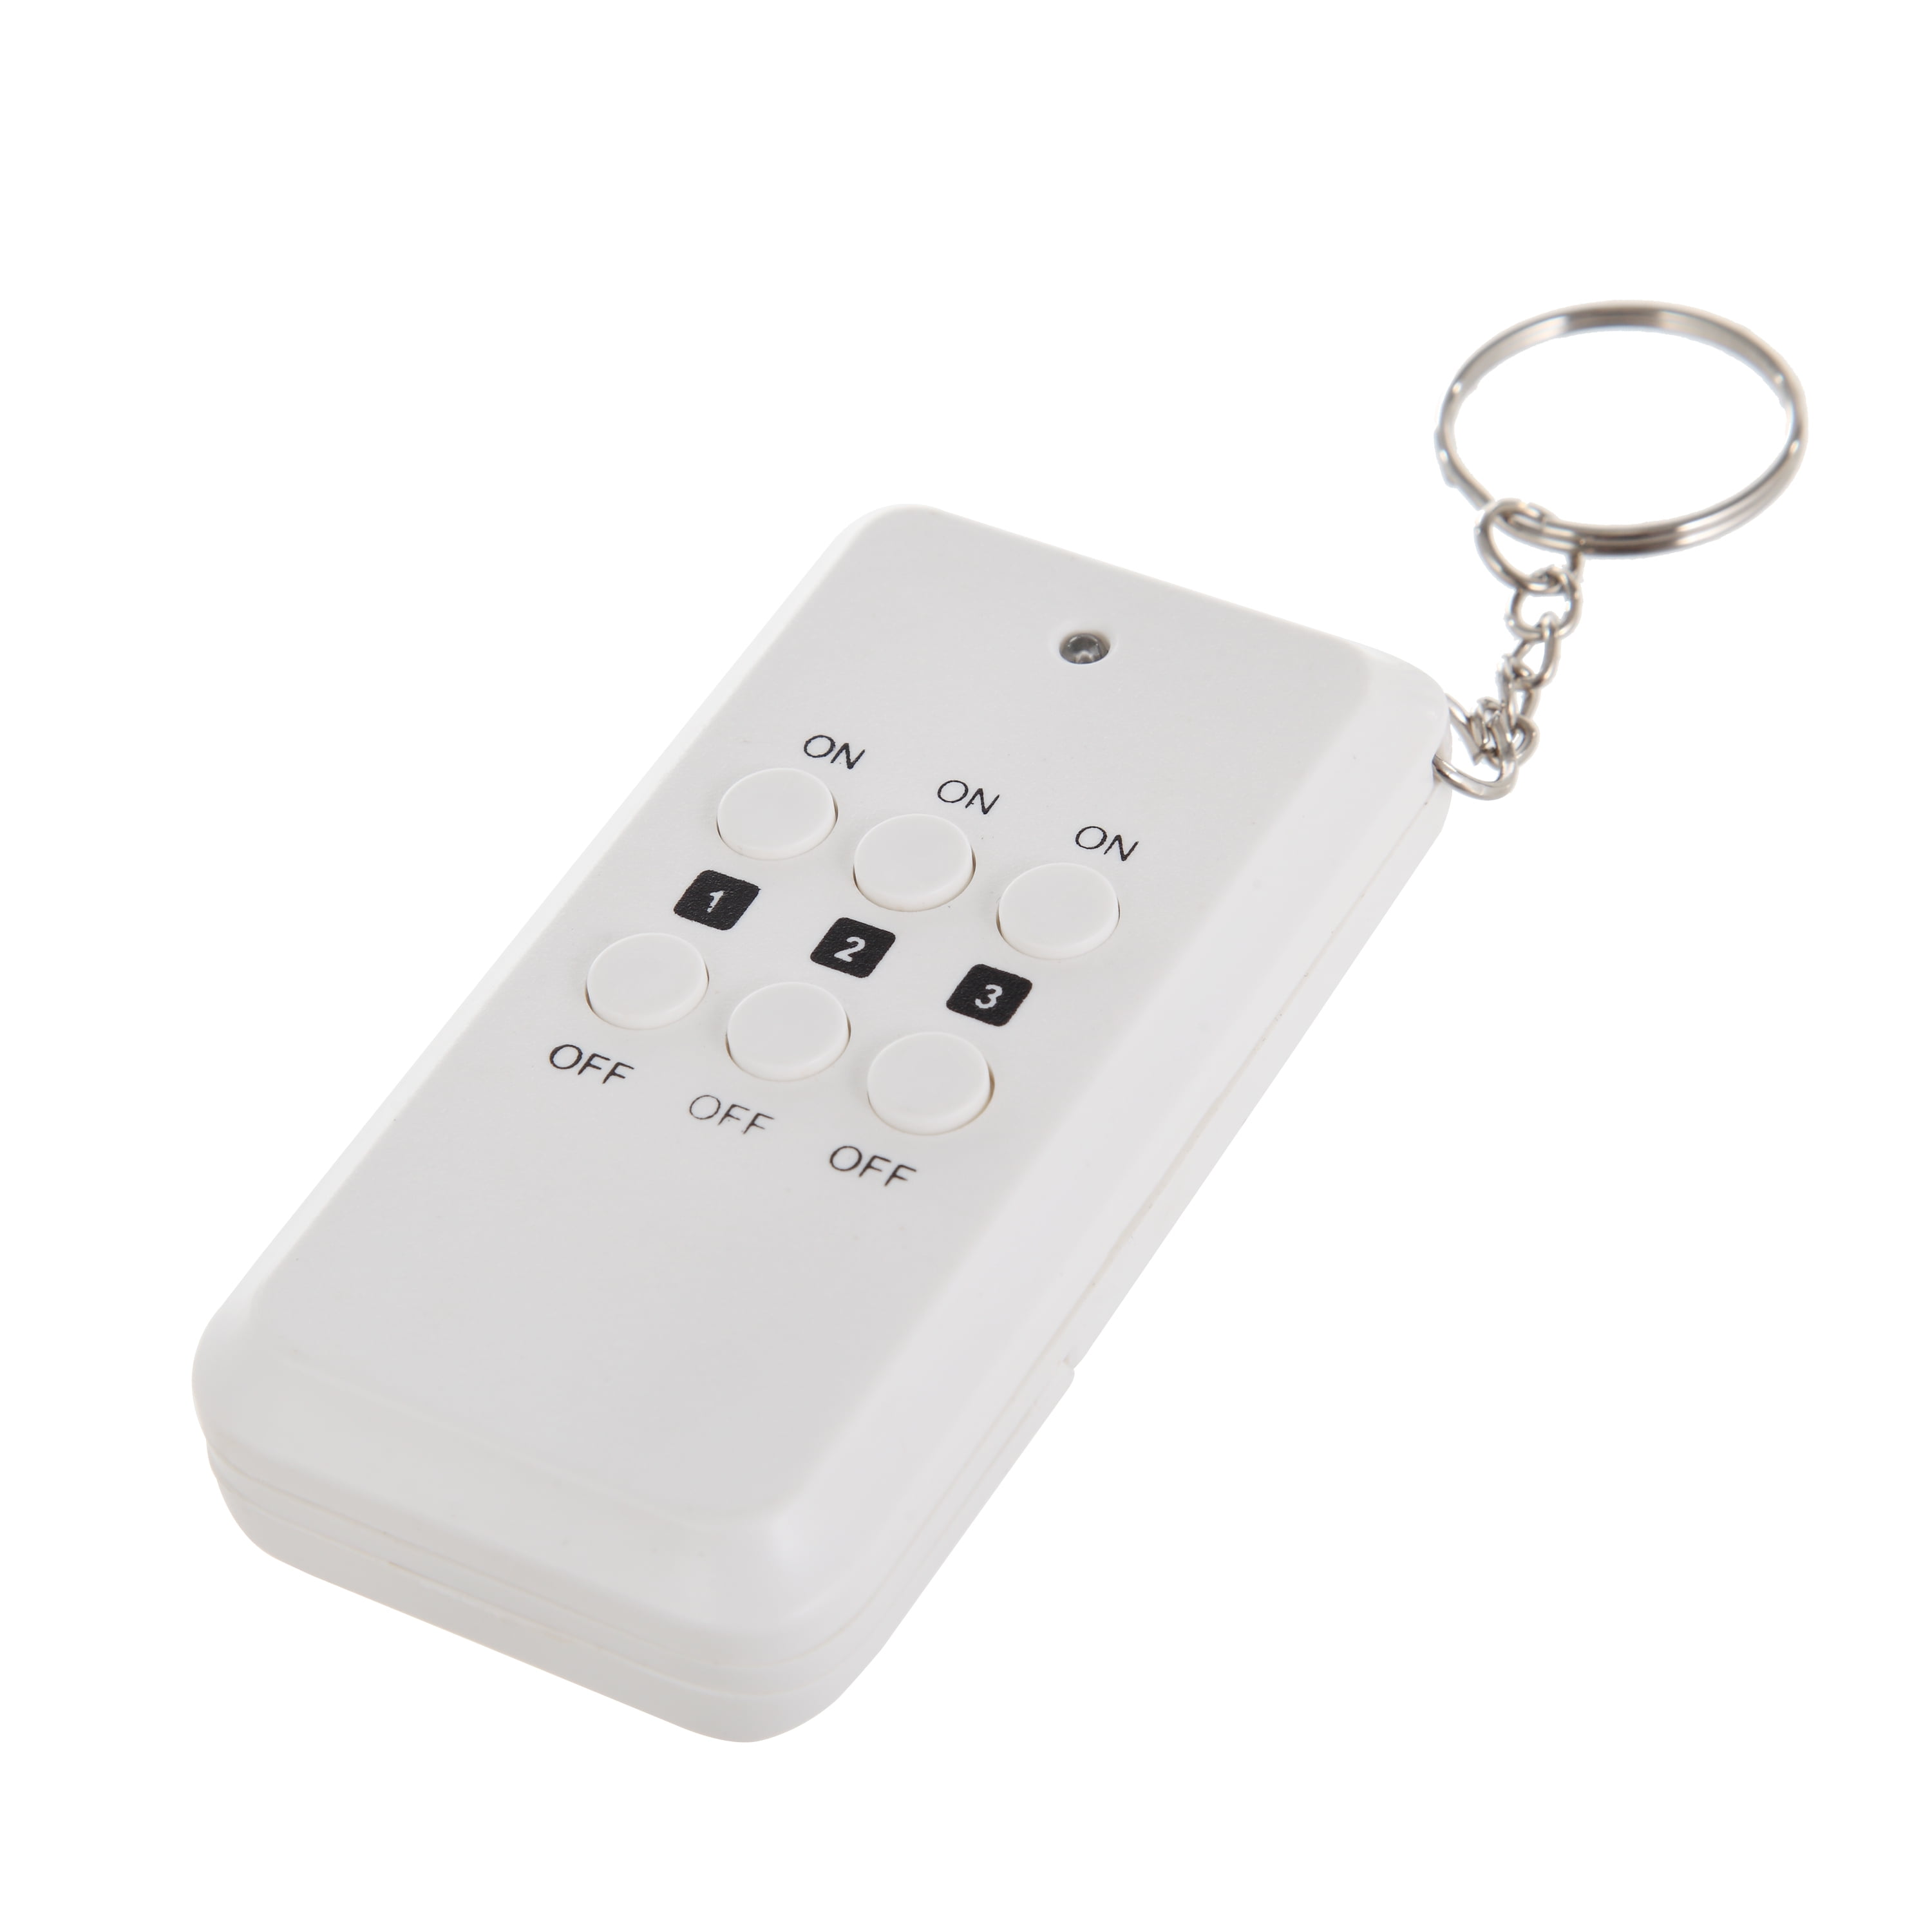 HYPER TOUGH Cord Connected Outdoor Wireless Remote Control Outlet